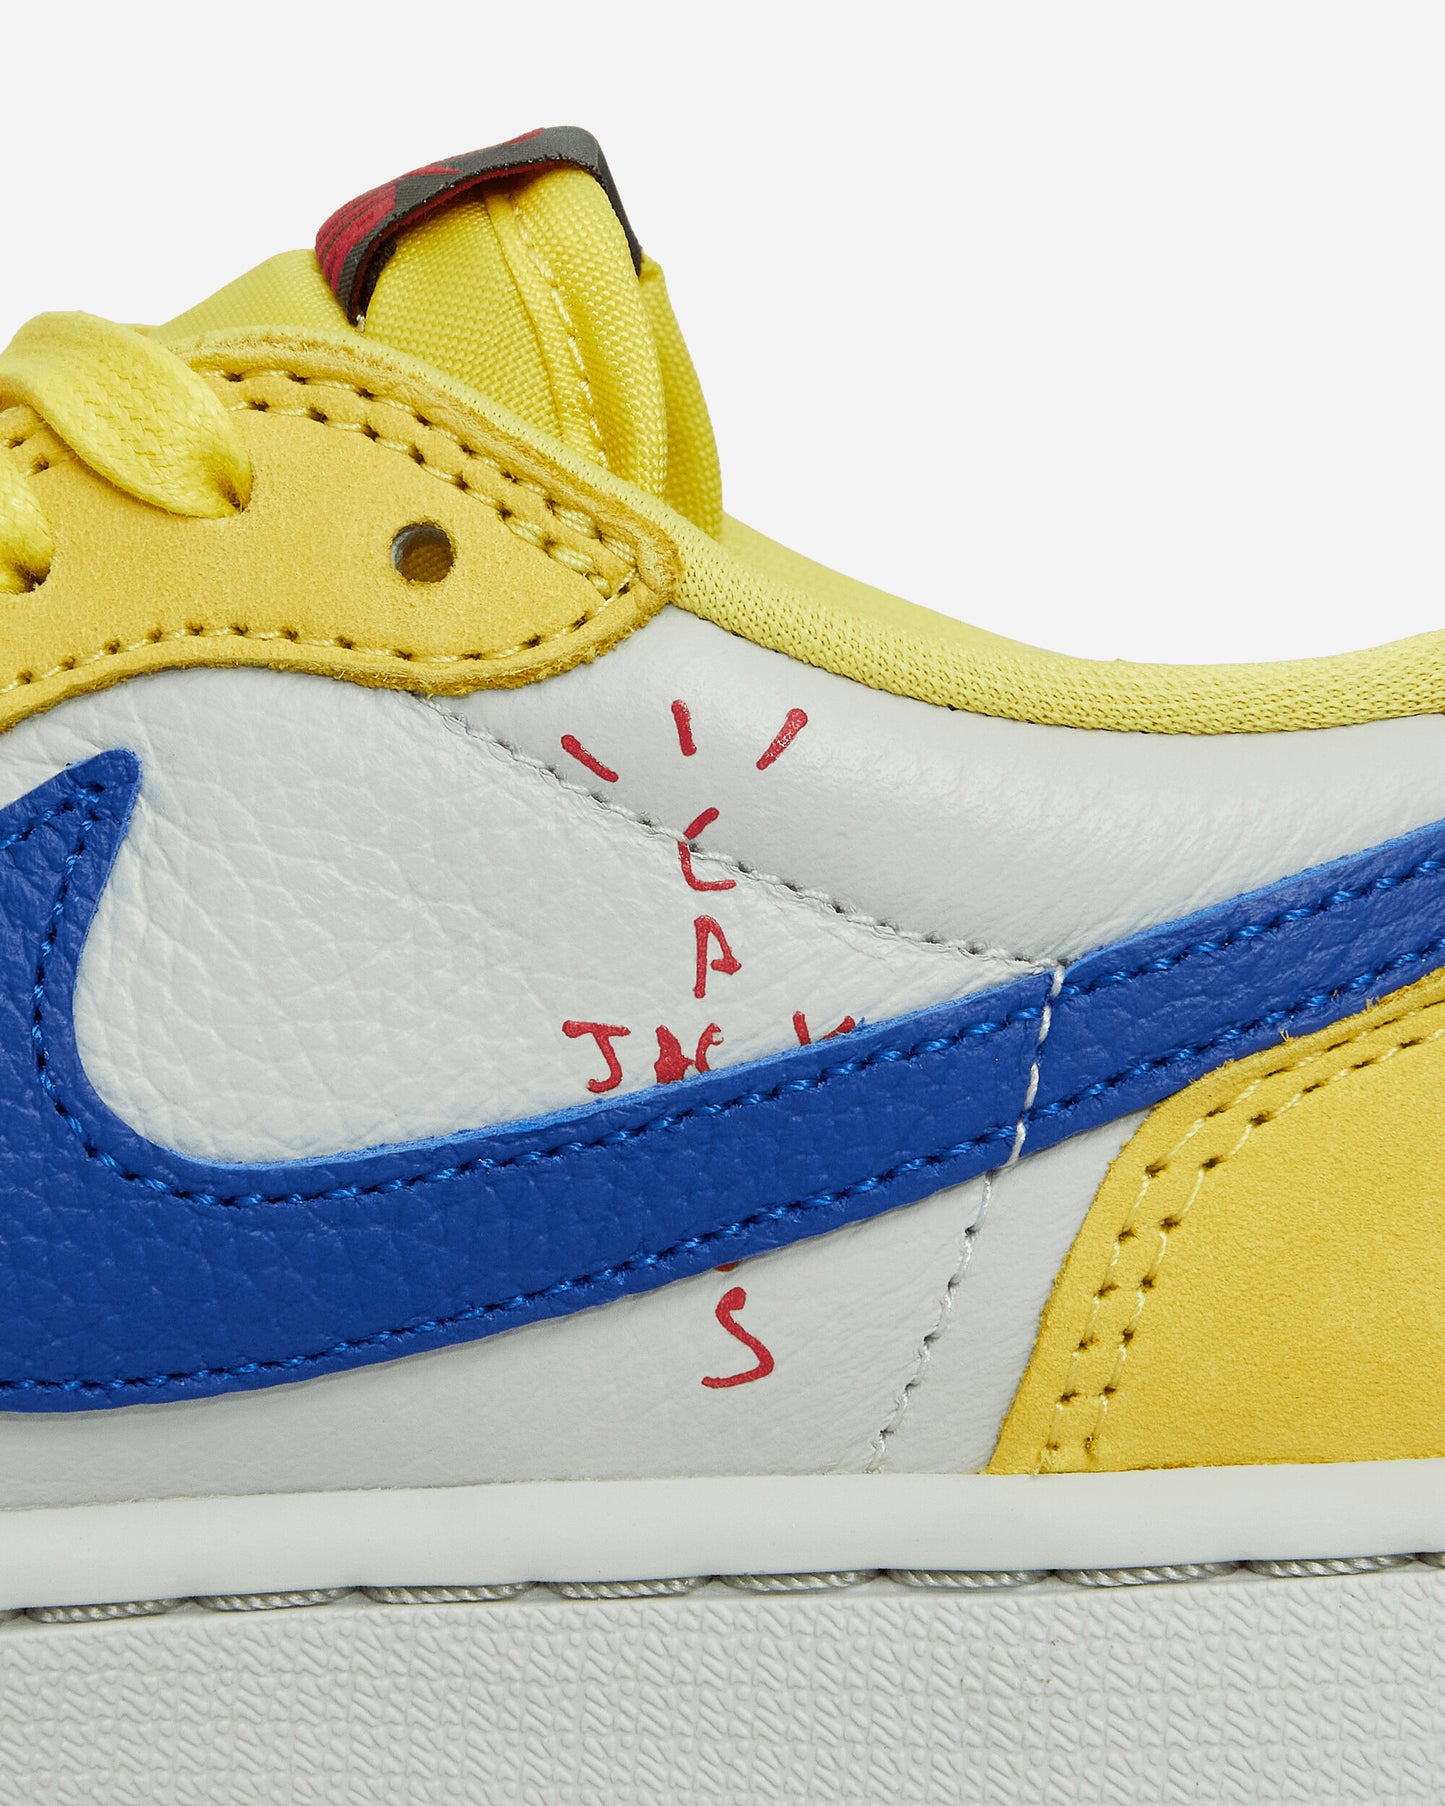 Nike Wmns Air Jordan 1 Low Og Sp Canary/Racer Blue/Silver Sneakers Low DZ4137-700